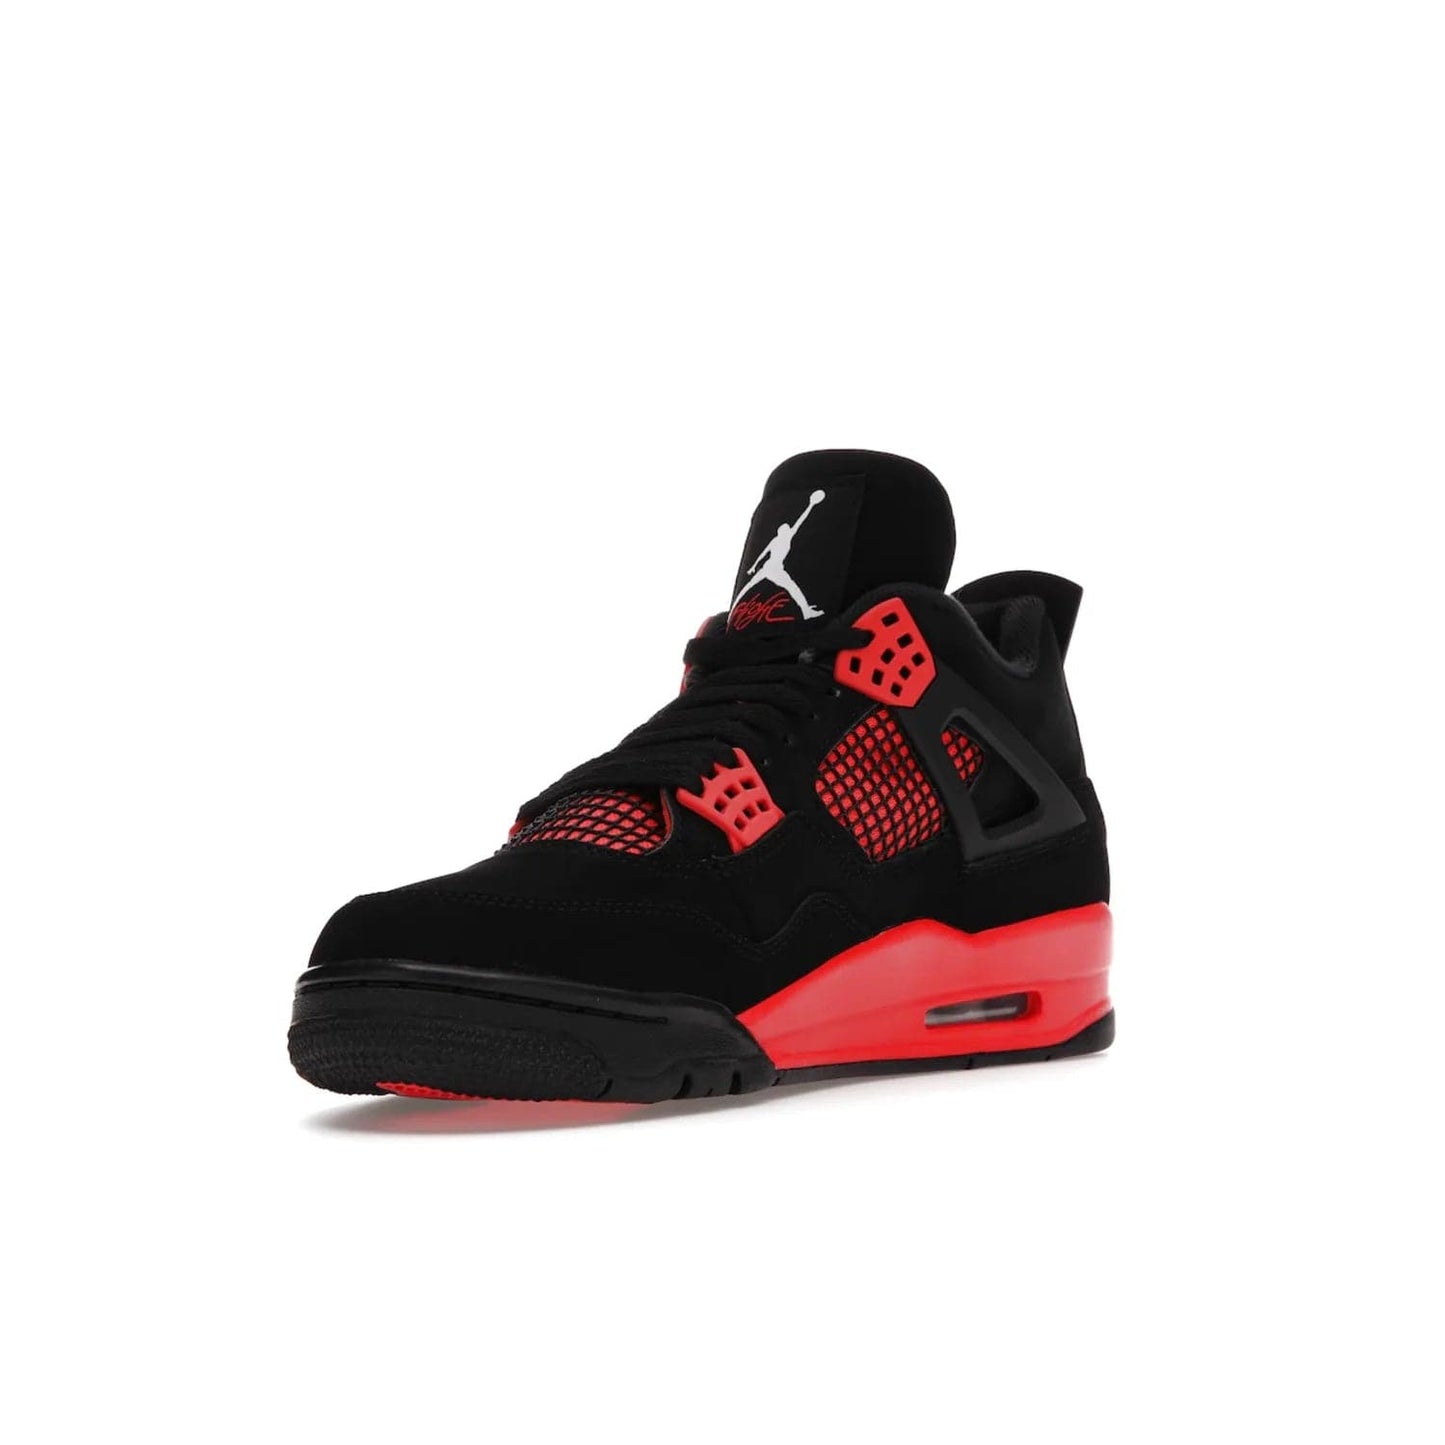 Jordan 4 Retro Red Thunder - Image 14 - Only at www.BallersClubKickz.com - Upscale your footwear with the Air Jordan 4 Retro Red Thunder. Featuring a Durabuck upper, red underlays, signature Flight patch, and vibrant red midsole, this retro sneaker adds style and edge. Releases in January 2022.